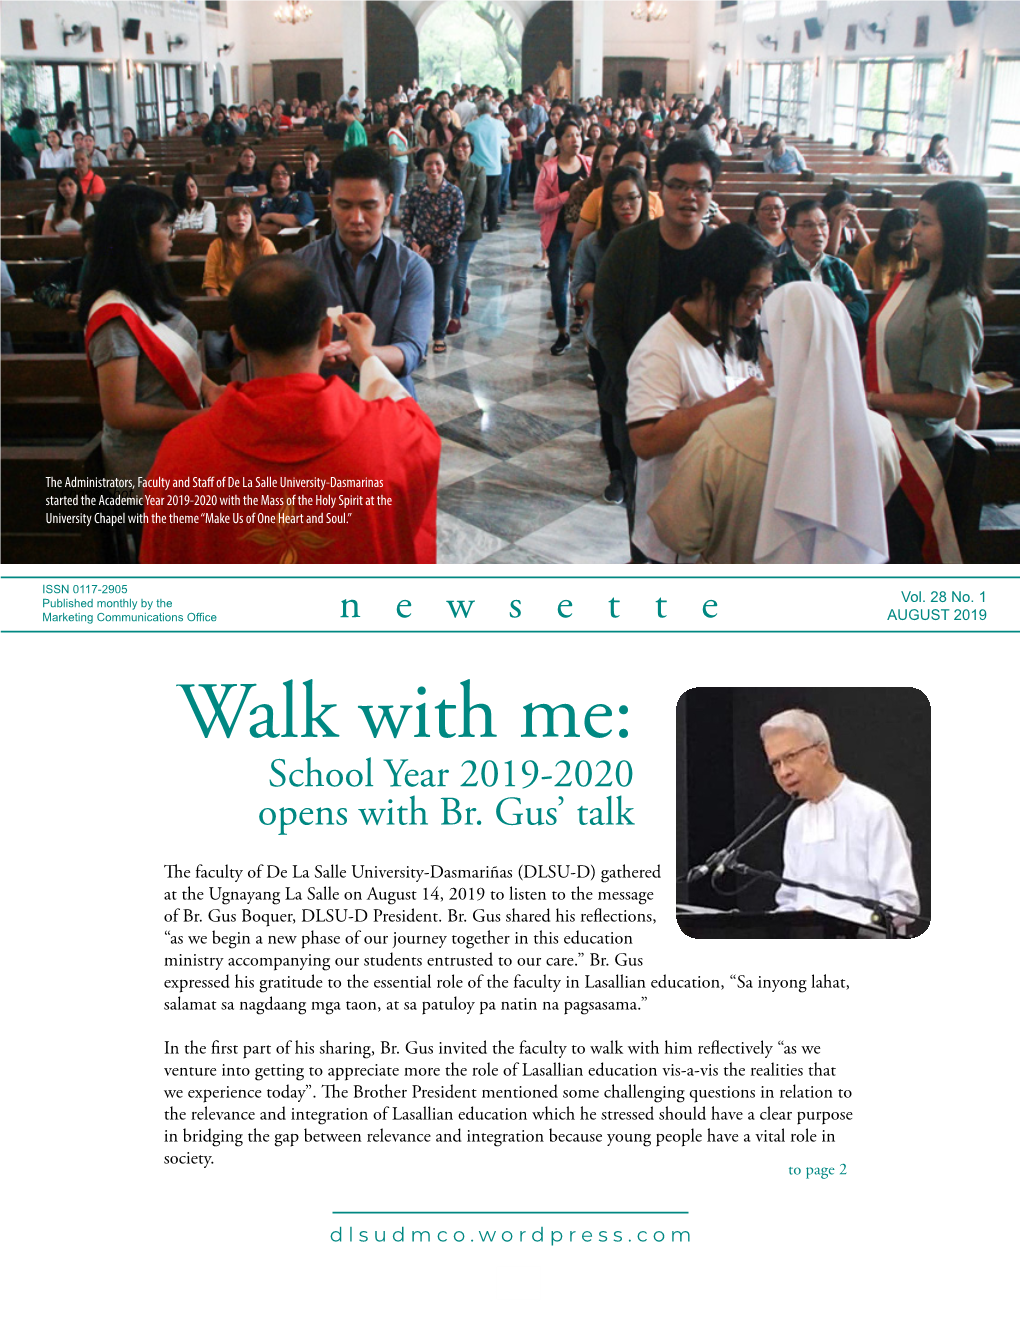 Walk with Me: School Year 2019-2020 Opens with Br